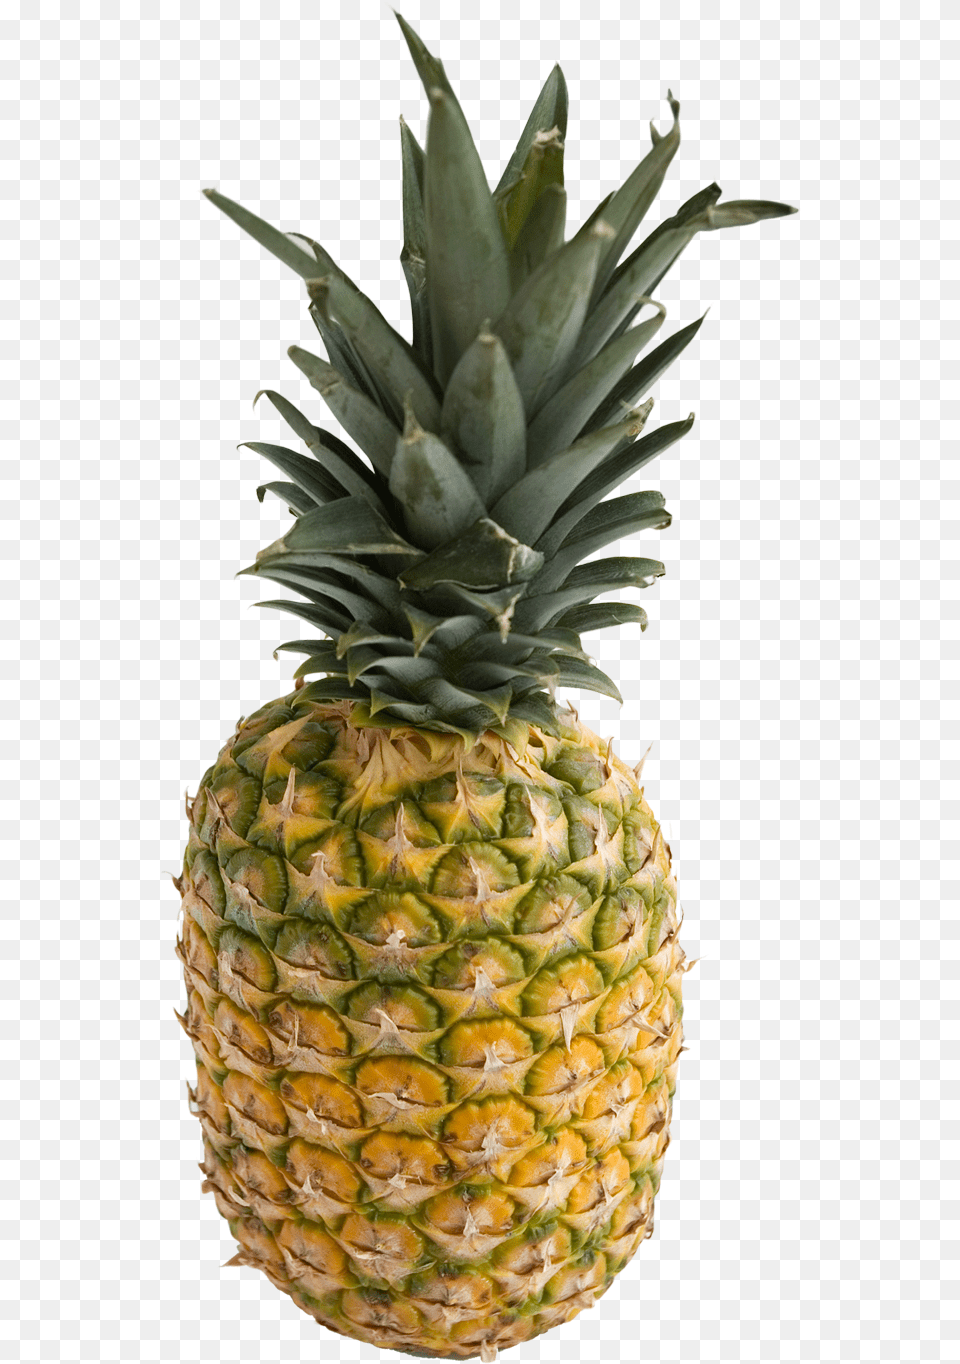 Pineapple And Vectors For Pineapple Ananas, Food, Fruit, Plant, Produce Free Png Download